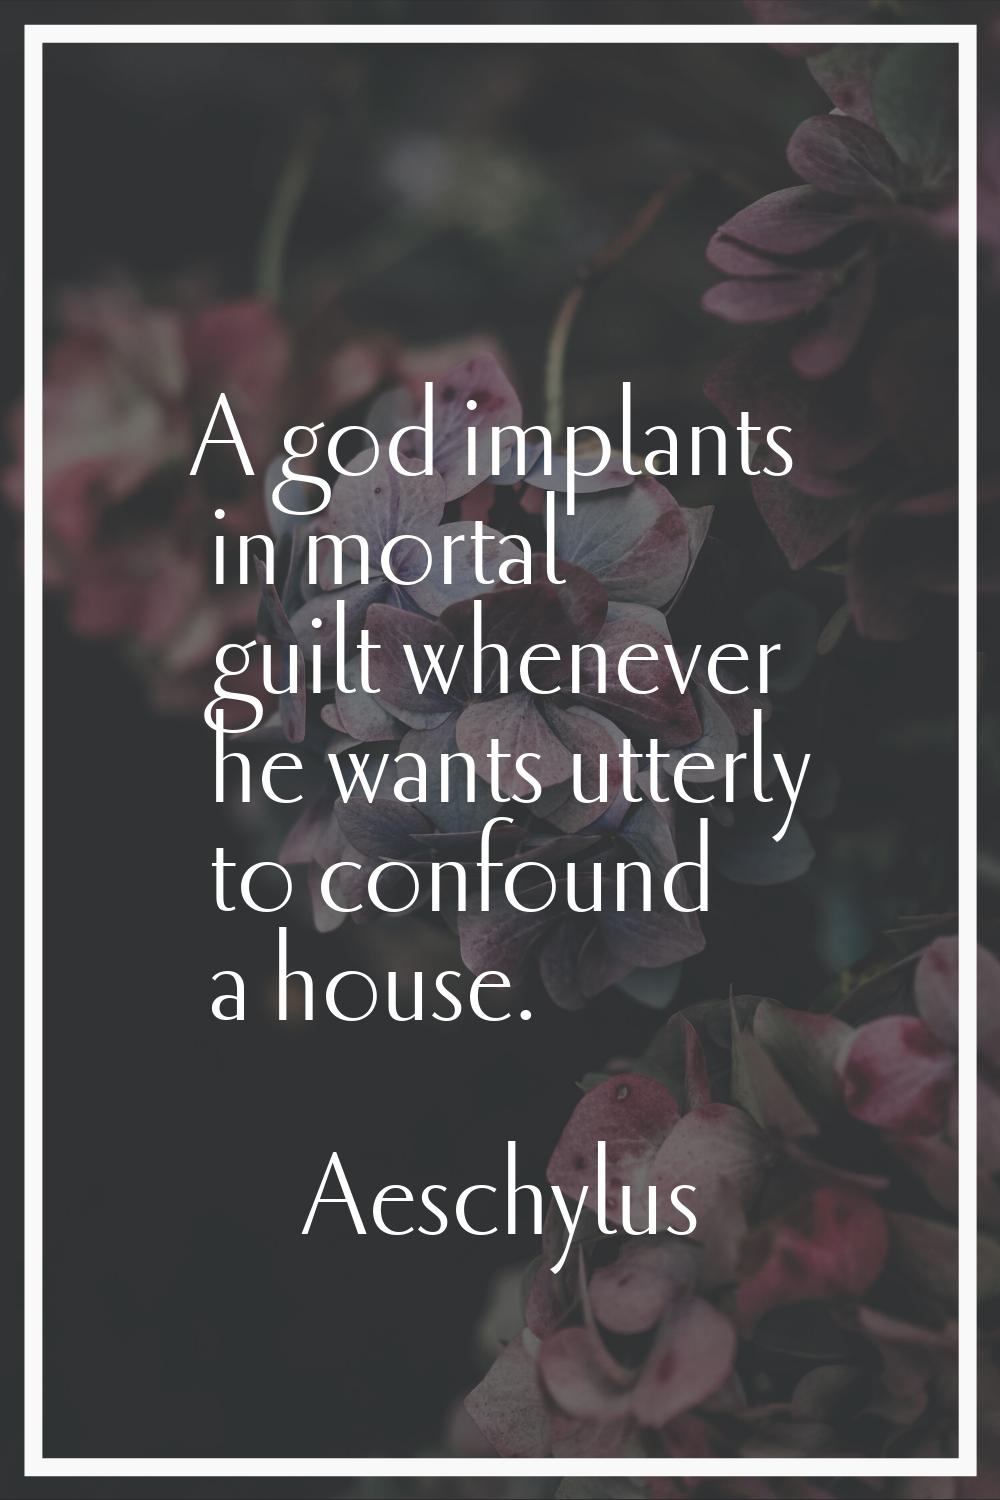 A god implants in mortal guilt whenever he wants utterly to confound a house.